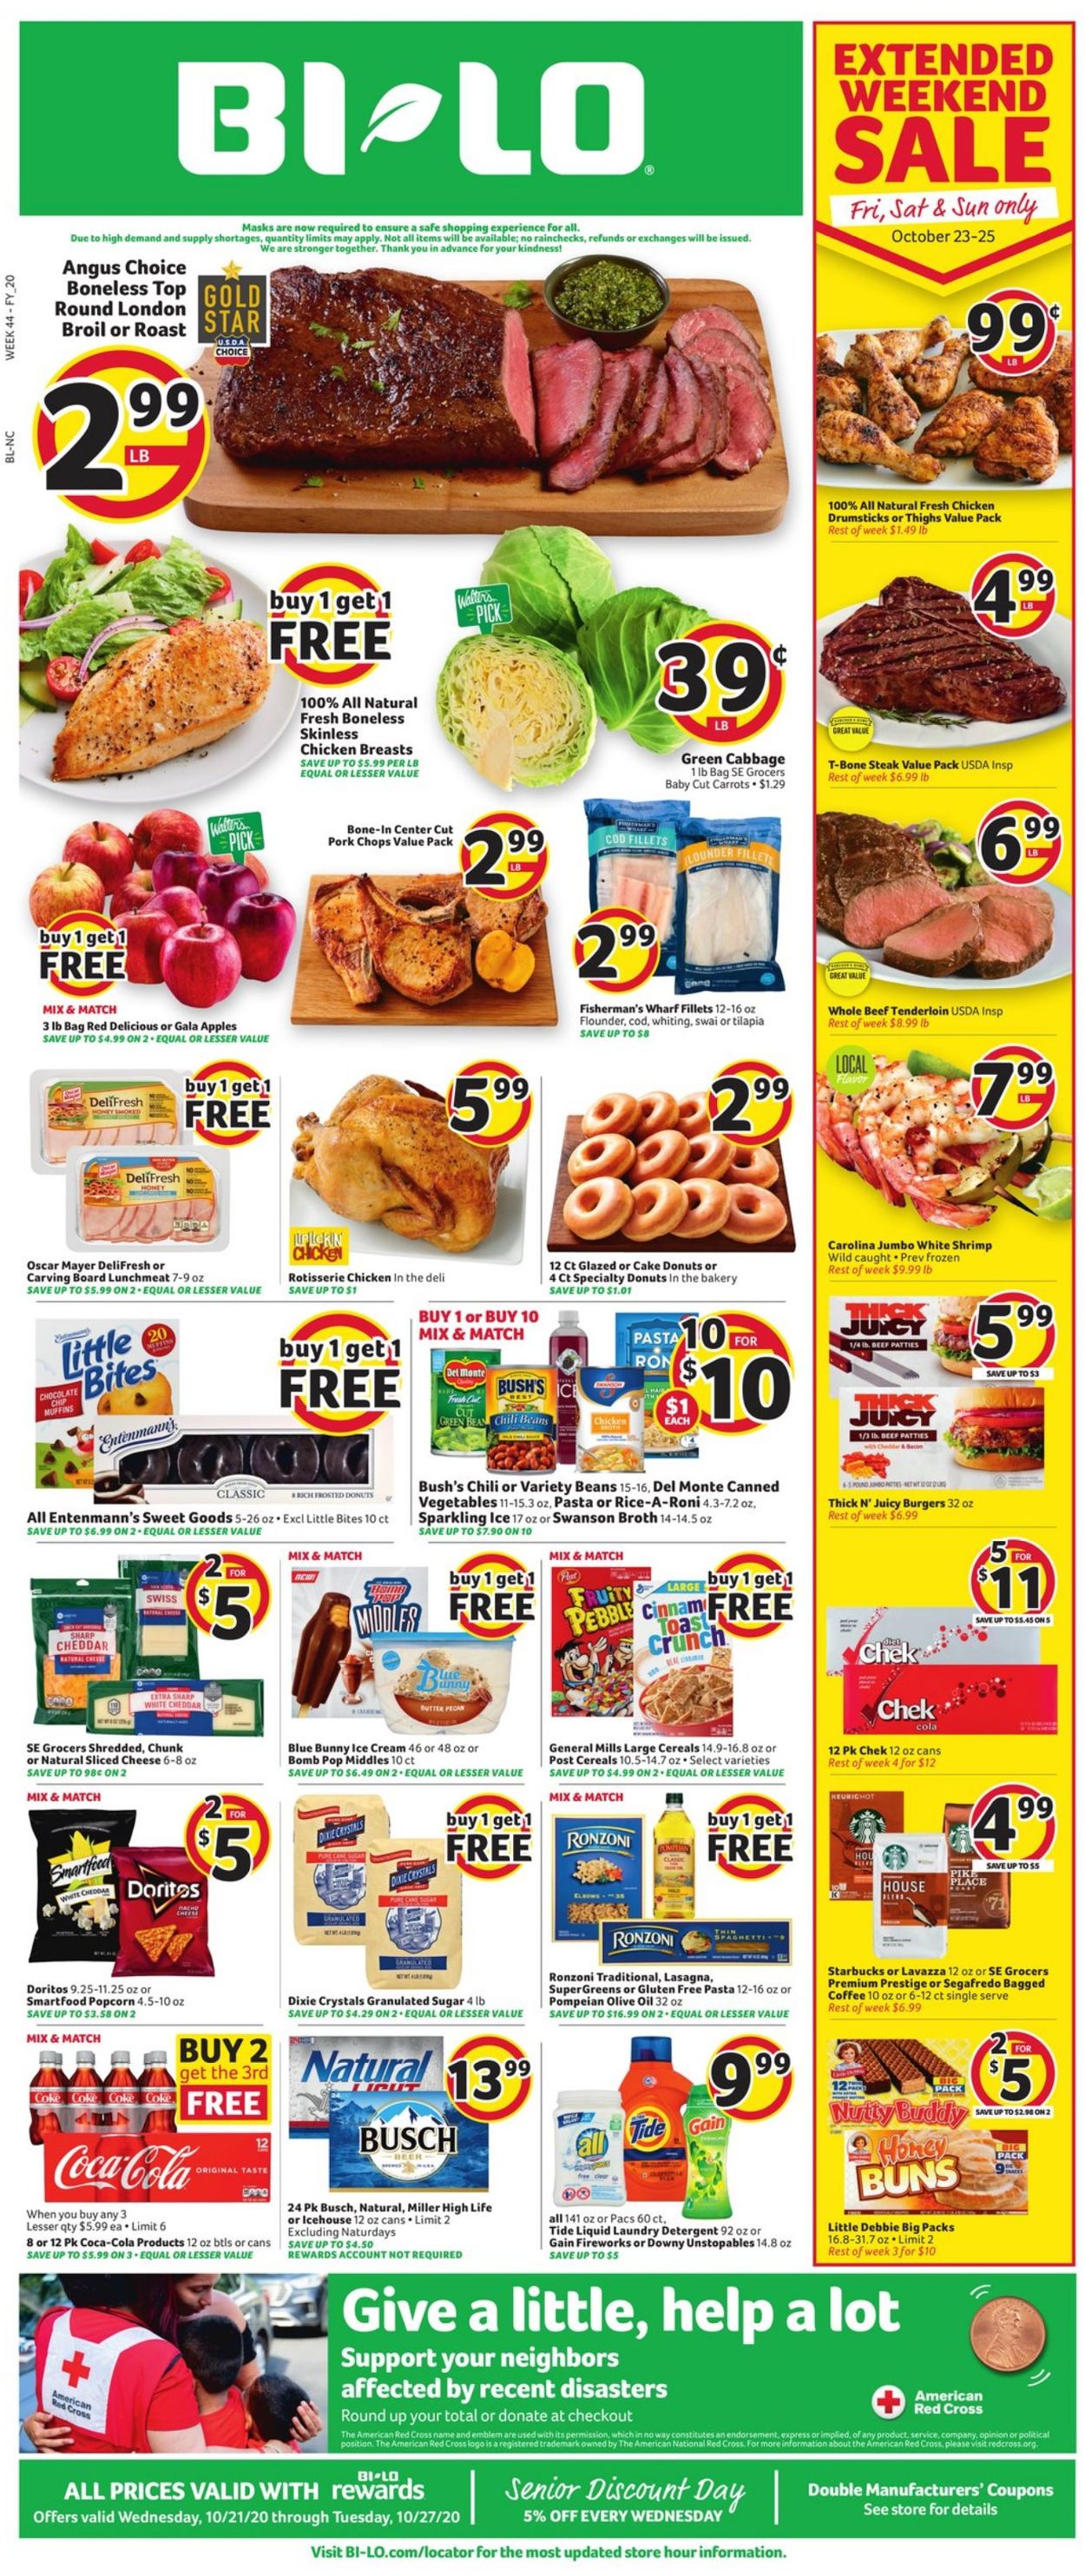 BI-LO Current weekly ad 10/21 - 10/27/2020 - frequent-ads.com